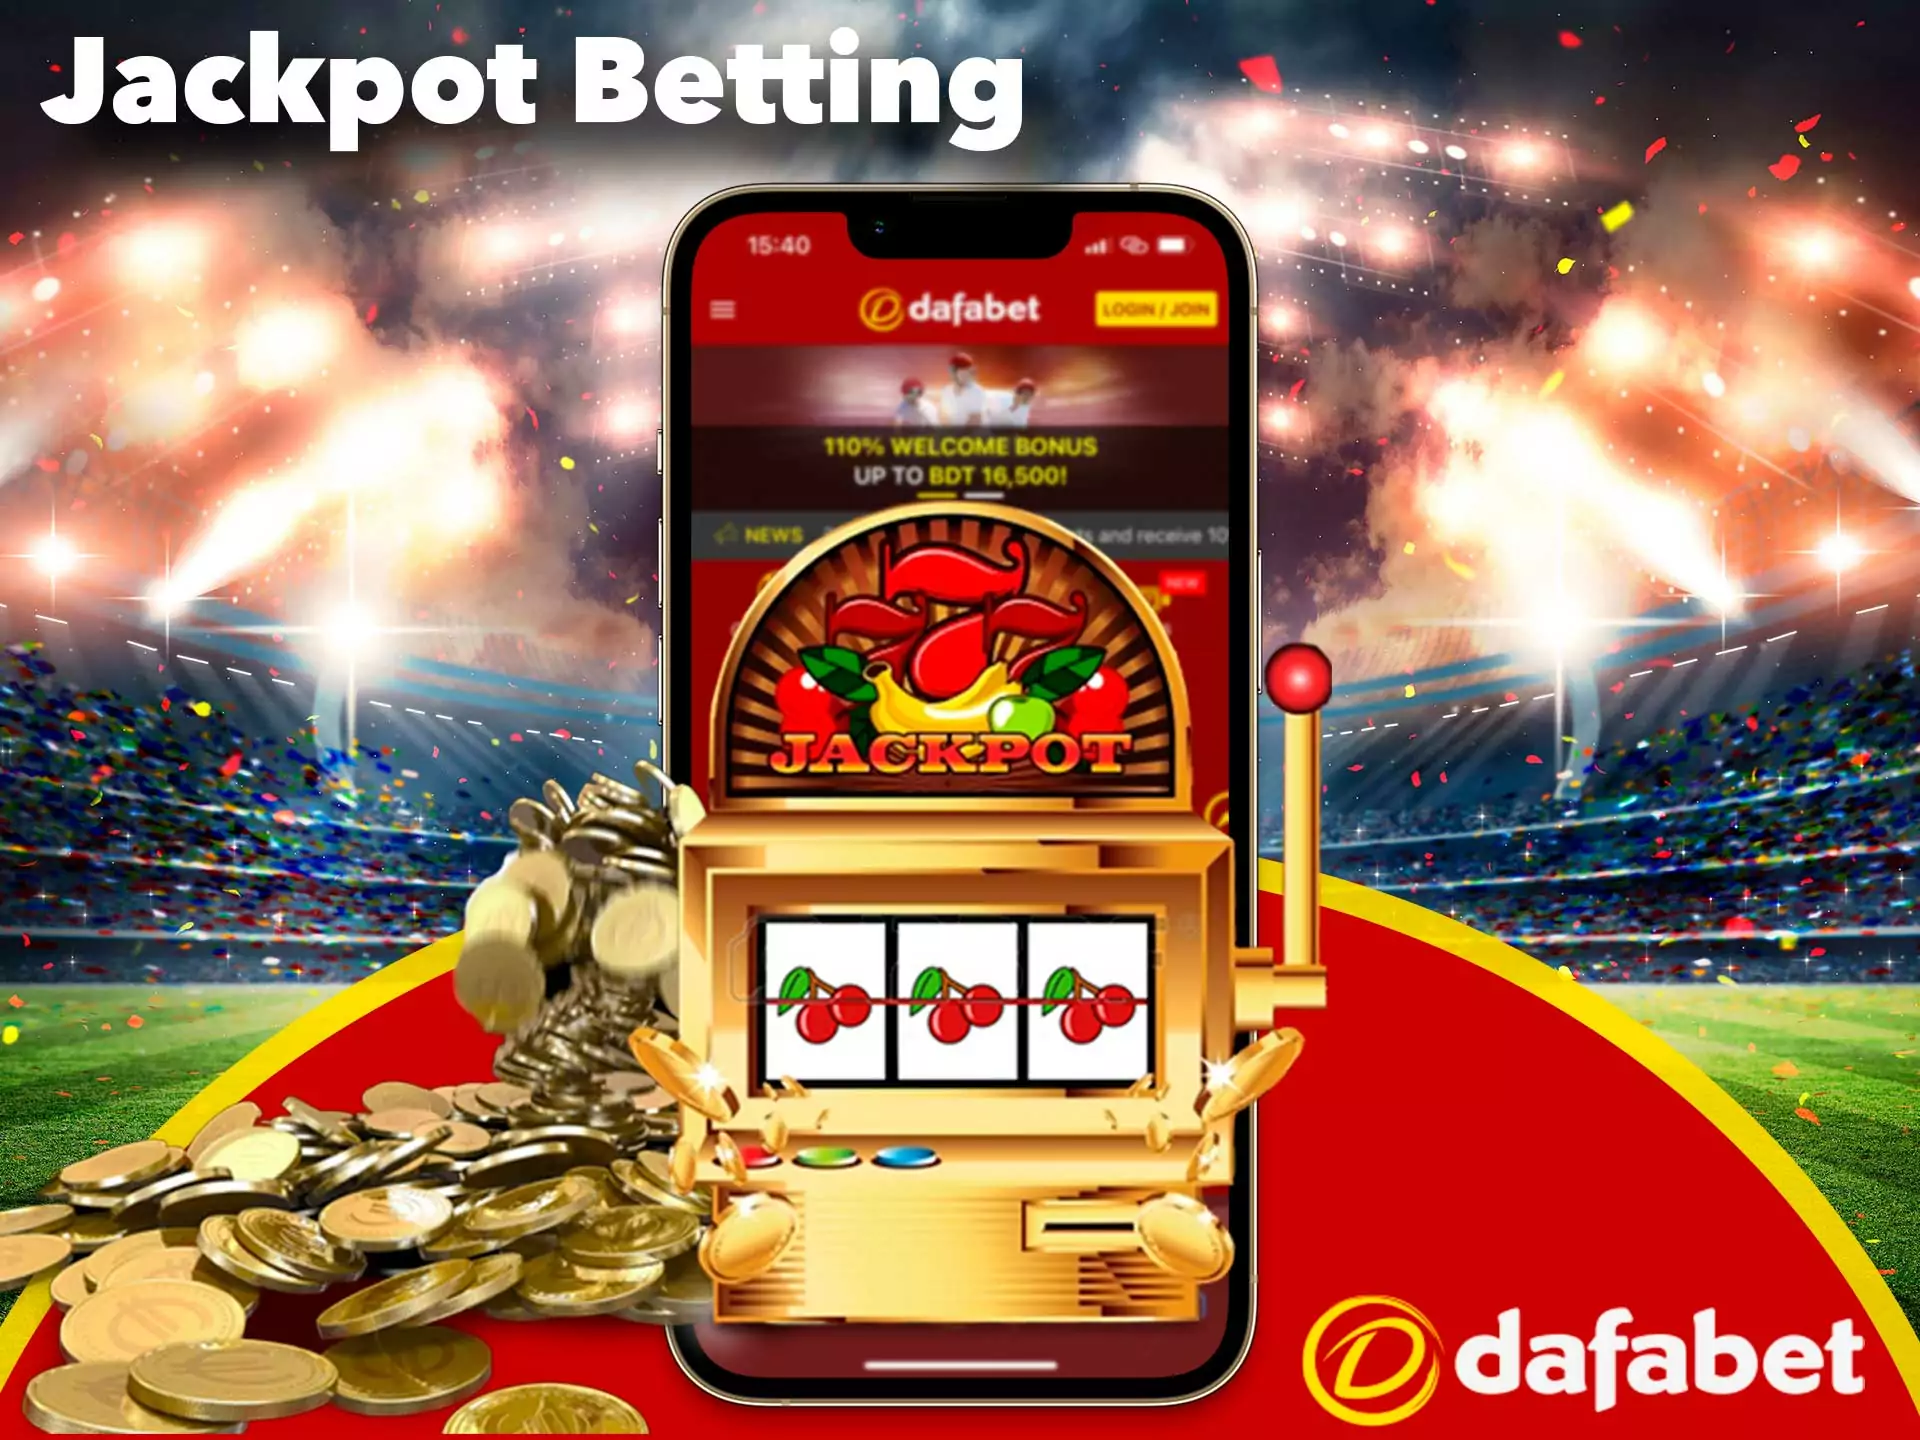 Win a big amount to your Dafabet account.